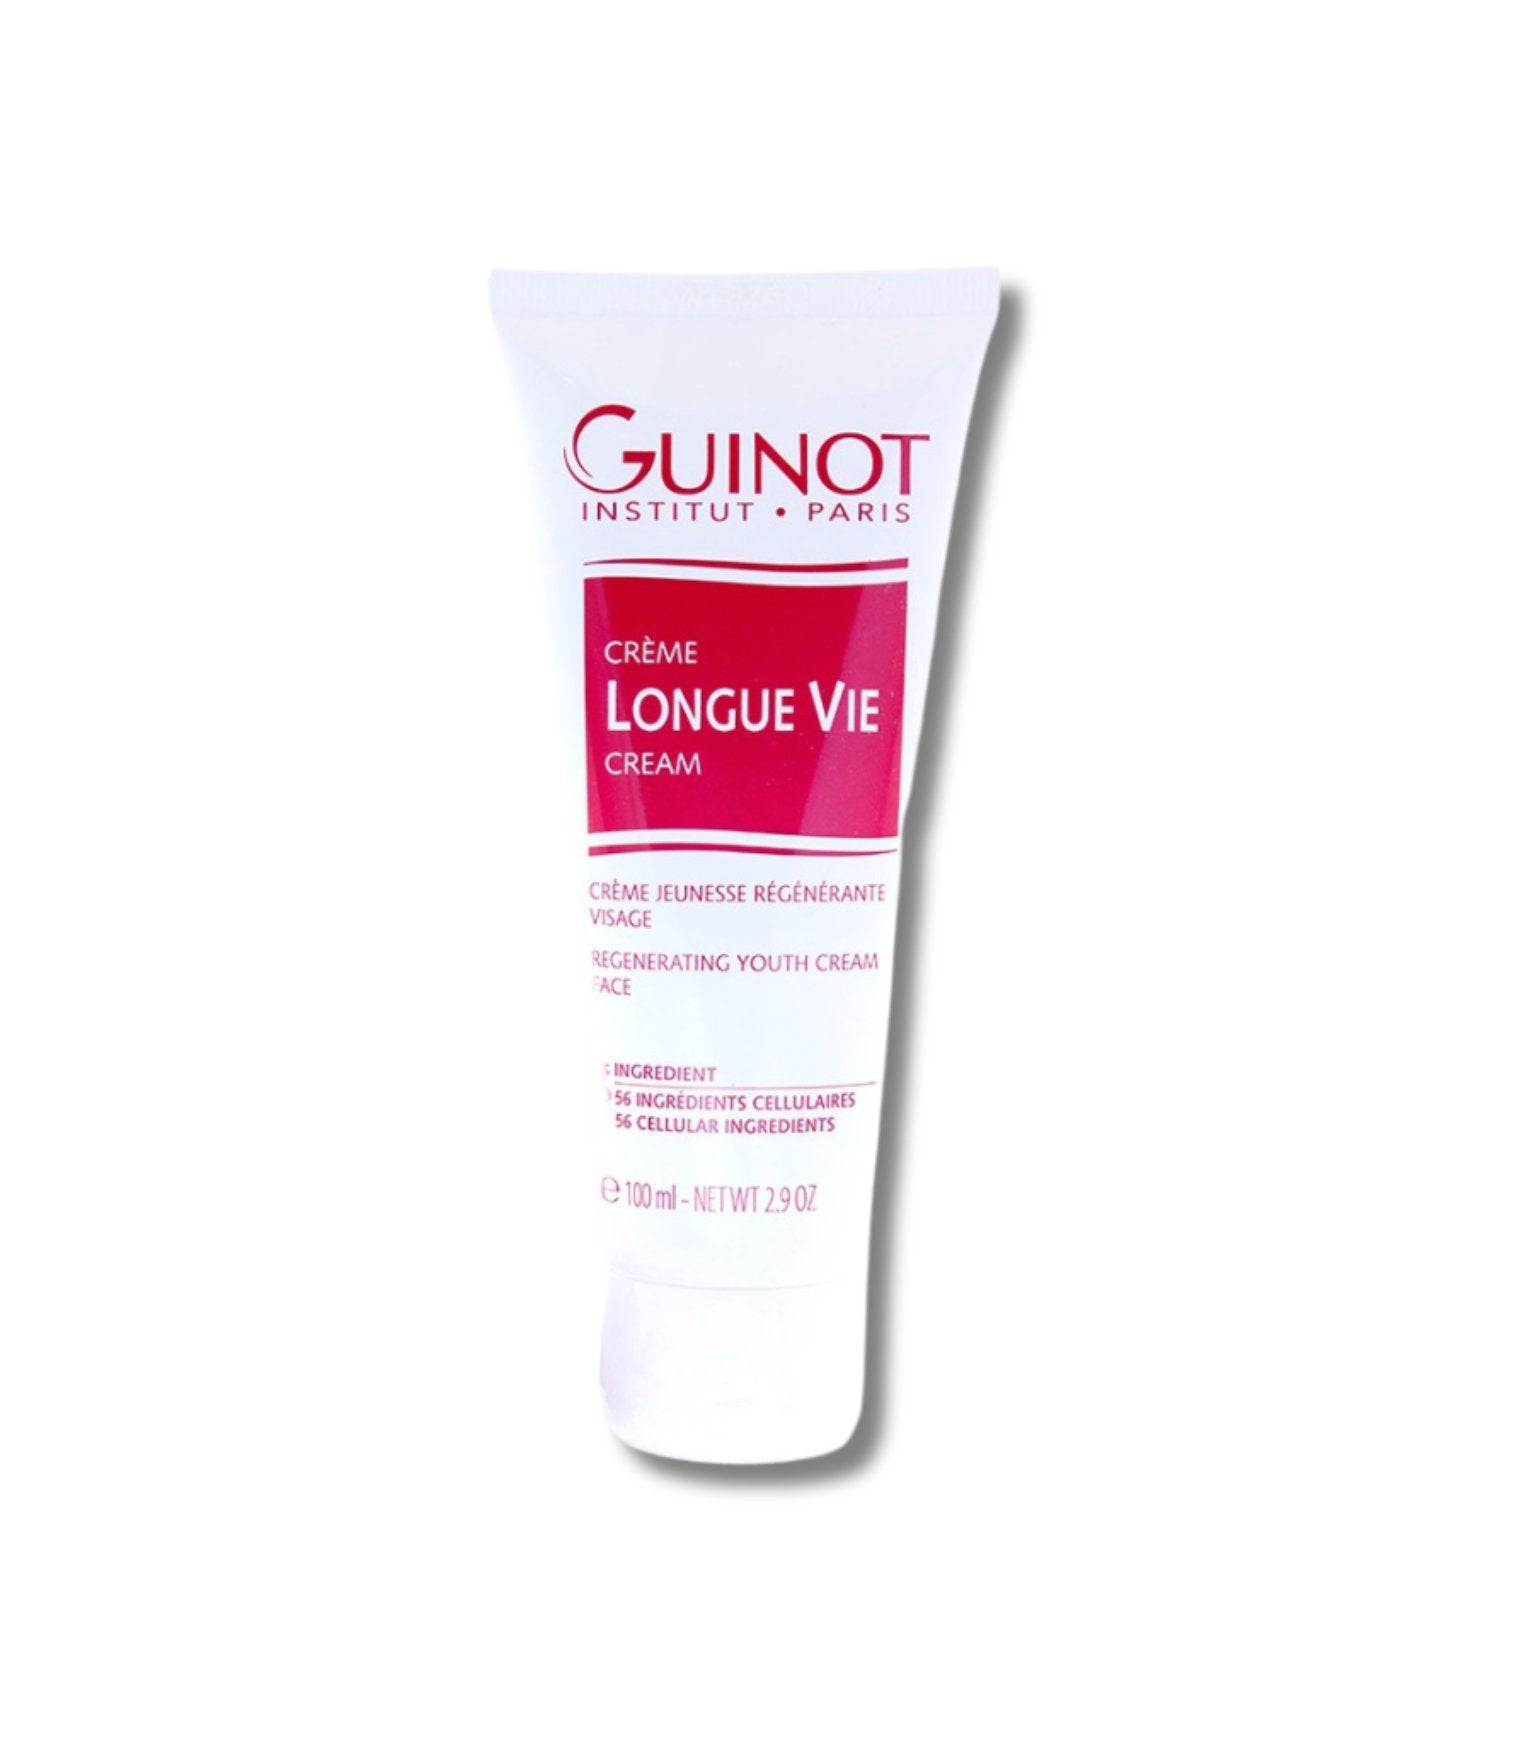 Spend $119 on Guinot and receive Longue Vie Regenerating Youth Cream 15ml - French Beauty Co.